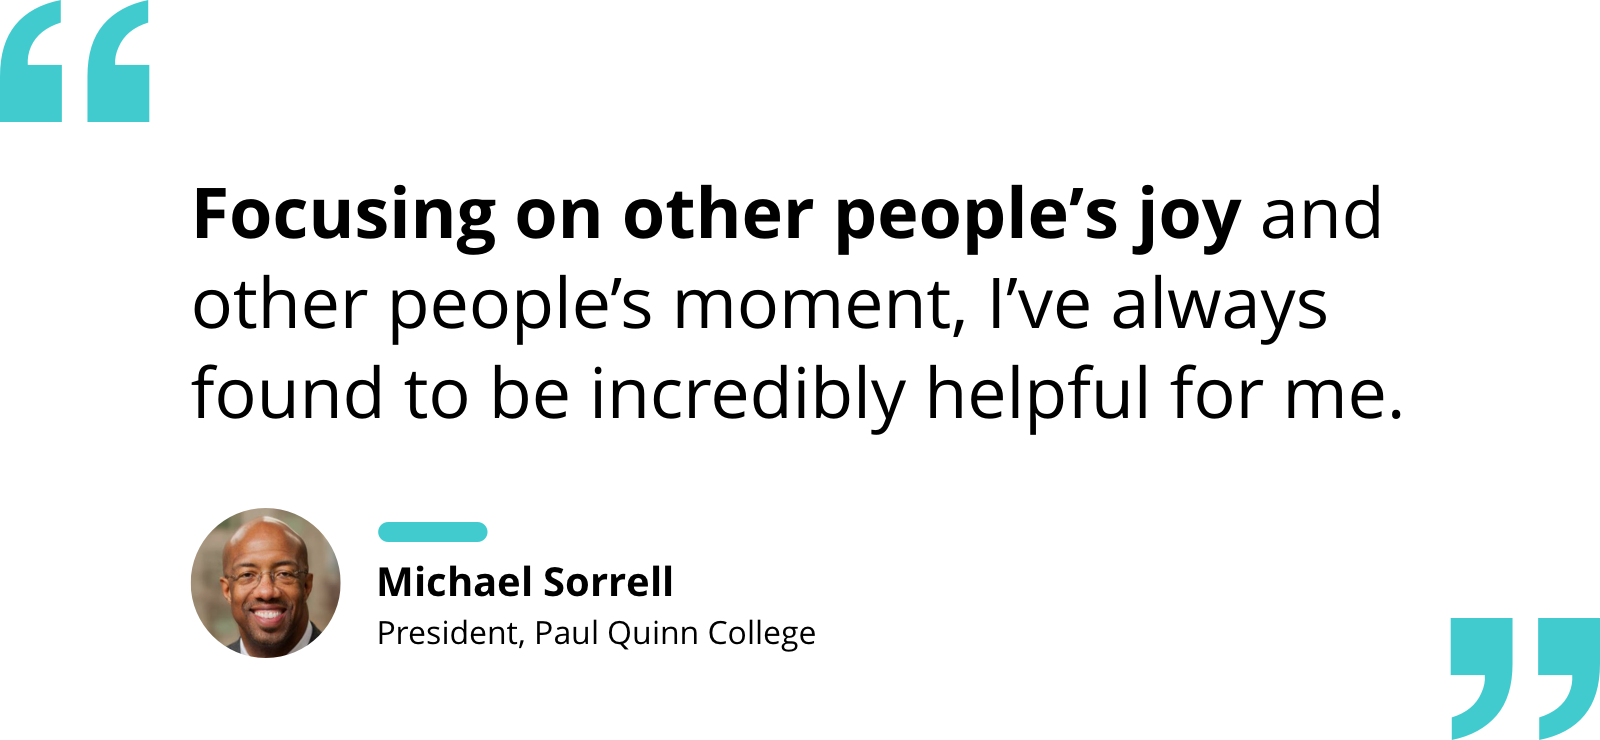 Quote by Michael Sorrell re: the benefits of "focusing on other people’s joy and other people’s moment."